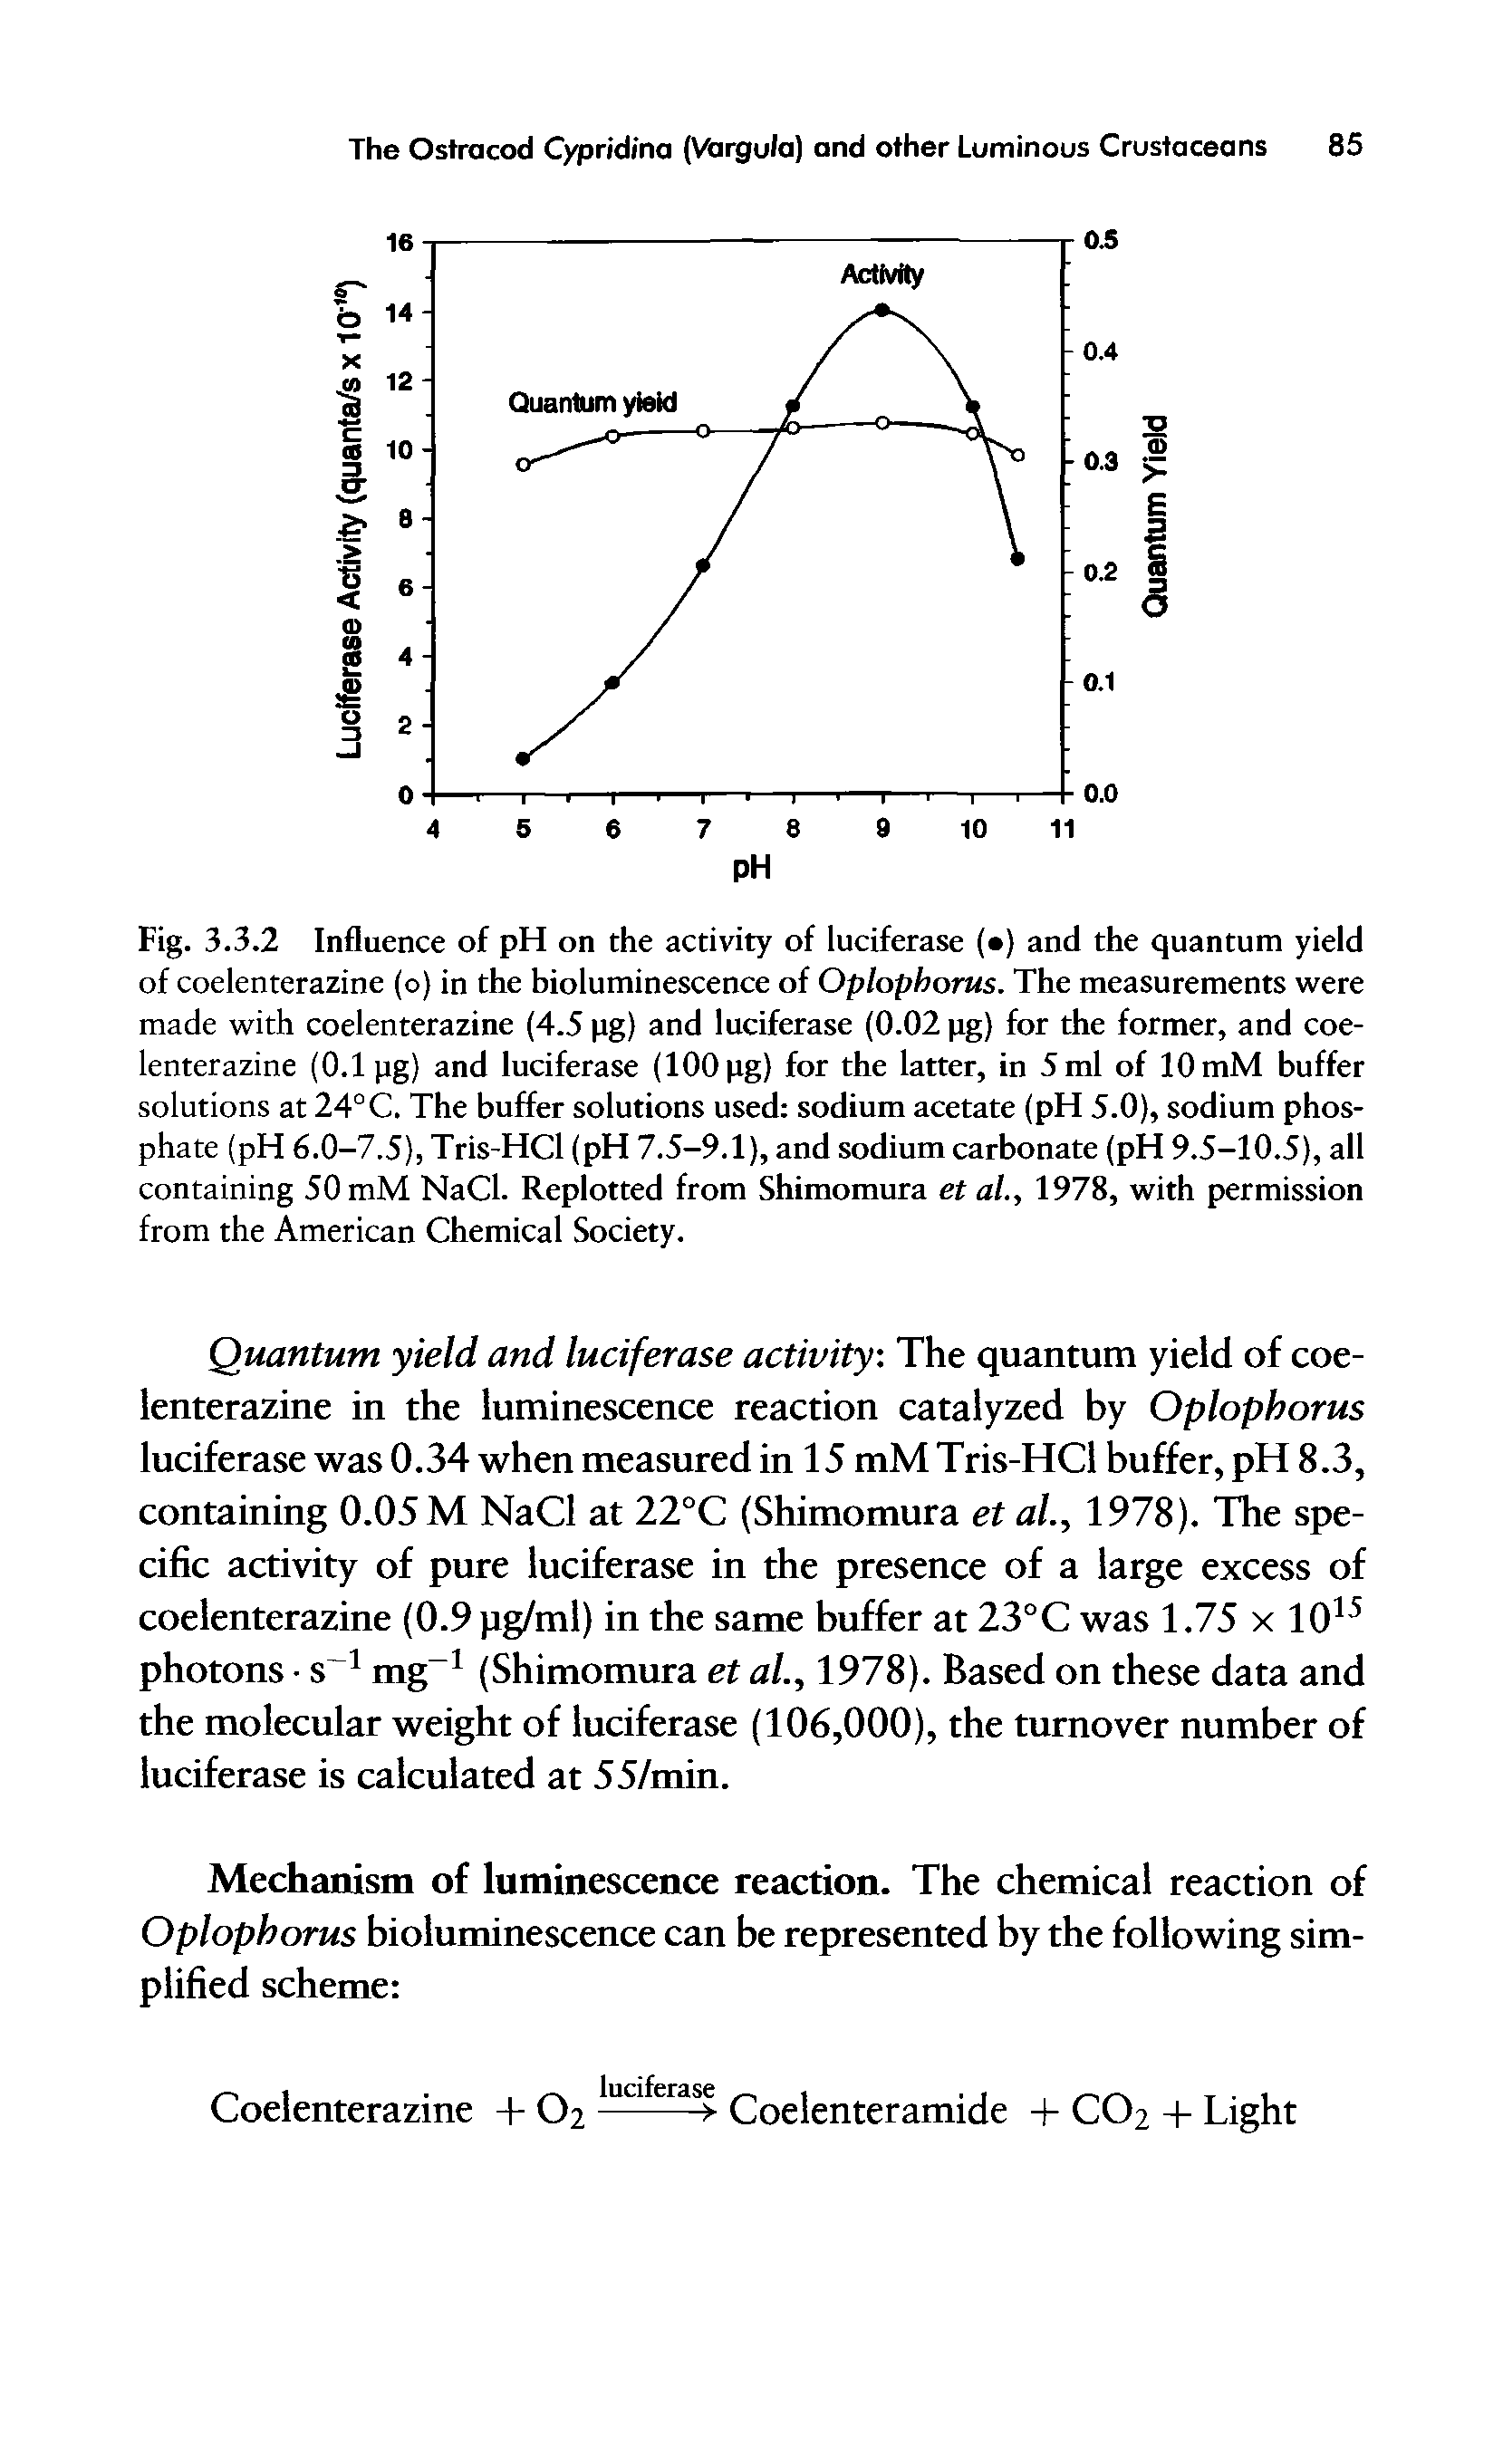 Fig. 3.3.2 Influence of pH on the activity of luciferase ( ) and the quantum yield of coelenterazine (o) in the bioluminescence of Oplophorus. The measurements were made with coelenterazine (4.5 pg) and luciferase (0.02 pg) for the former, and coelenterazine (0.1 pg) and luciferase (100 pg) for the latter, in 5 ml of 10 mM buffer solutions at 24° C. The buffer solutions used sodium acetate (pH 5.0), sodium phosphate (pH 6.0-7.5), Tris-HCl (pH 7.5-9.1), and sodium carbonate (pH 9.5-10.5), all containing 50 mM NaCl. Replotted from Shimomura et al., 1978, with permission from the American Chemical Society.